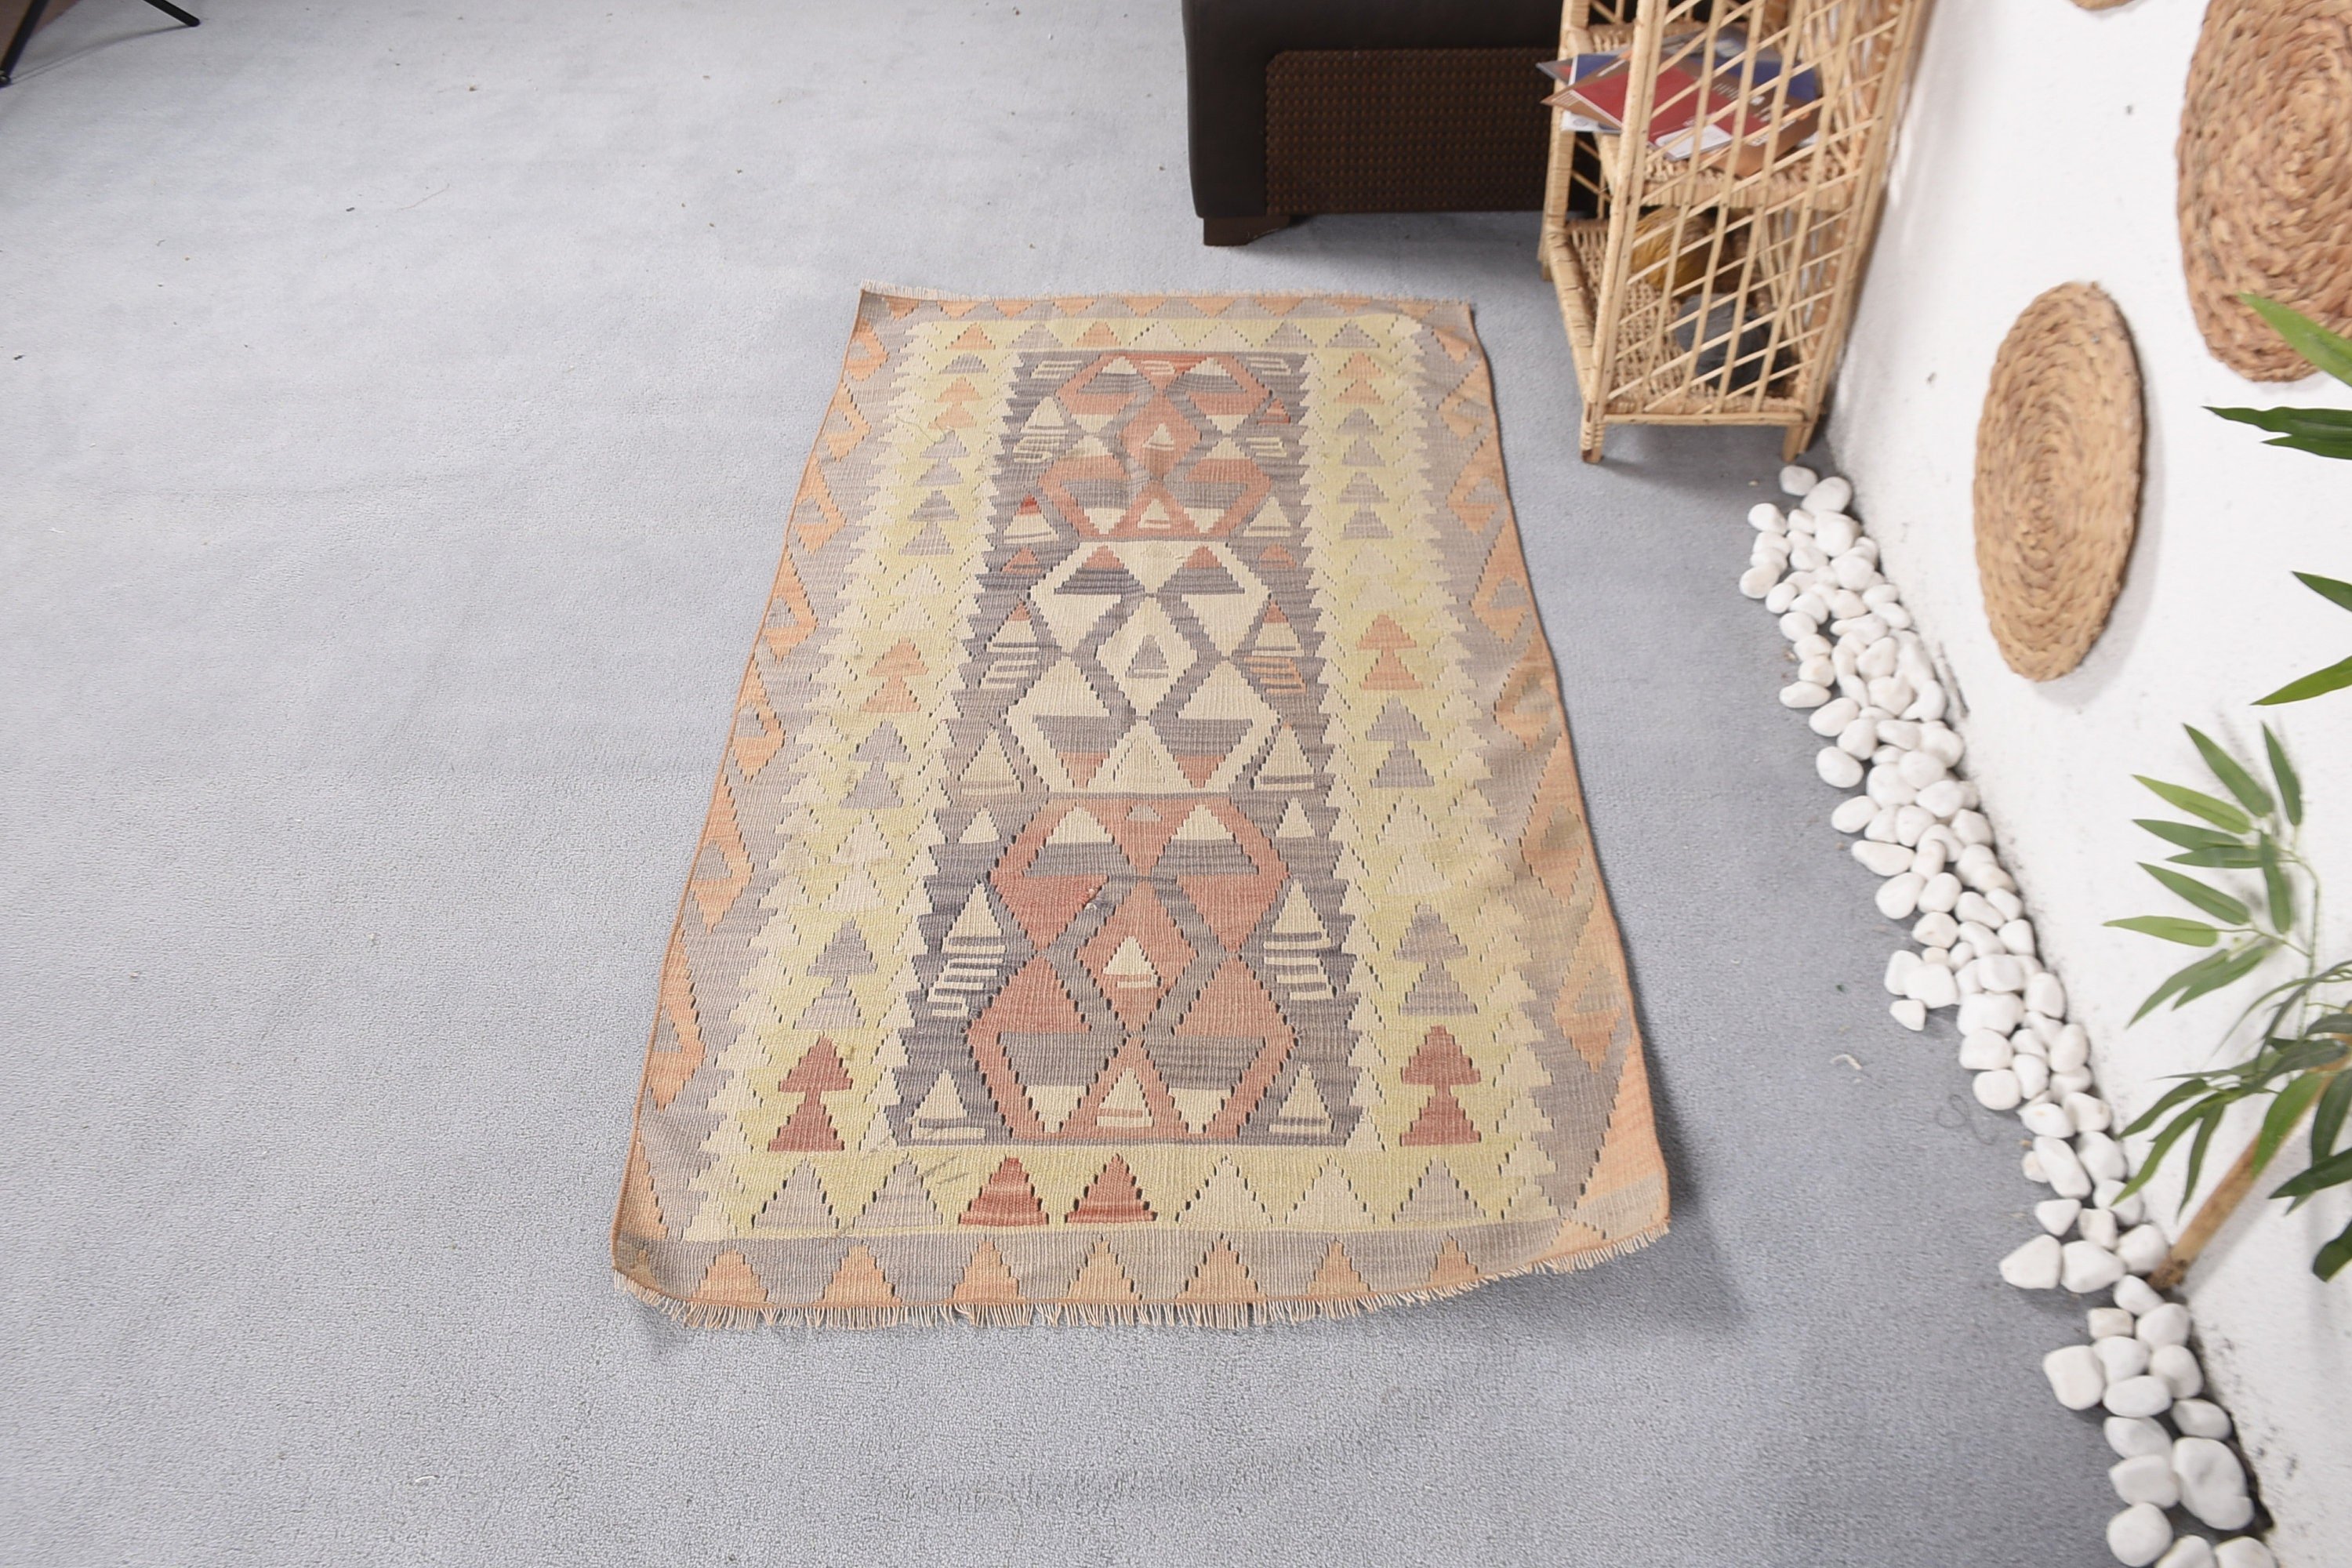 Gray Anatolian Rugs, Kilim, Bedroom Rug, Turkish Rugs, 3x5.2 ft Accent Rug, Old Rugs, Kitchen Rug, Oushak Rug, Vintage Rug, Home Decor Rugs